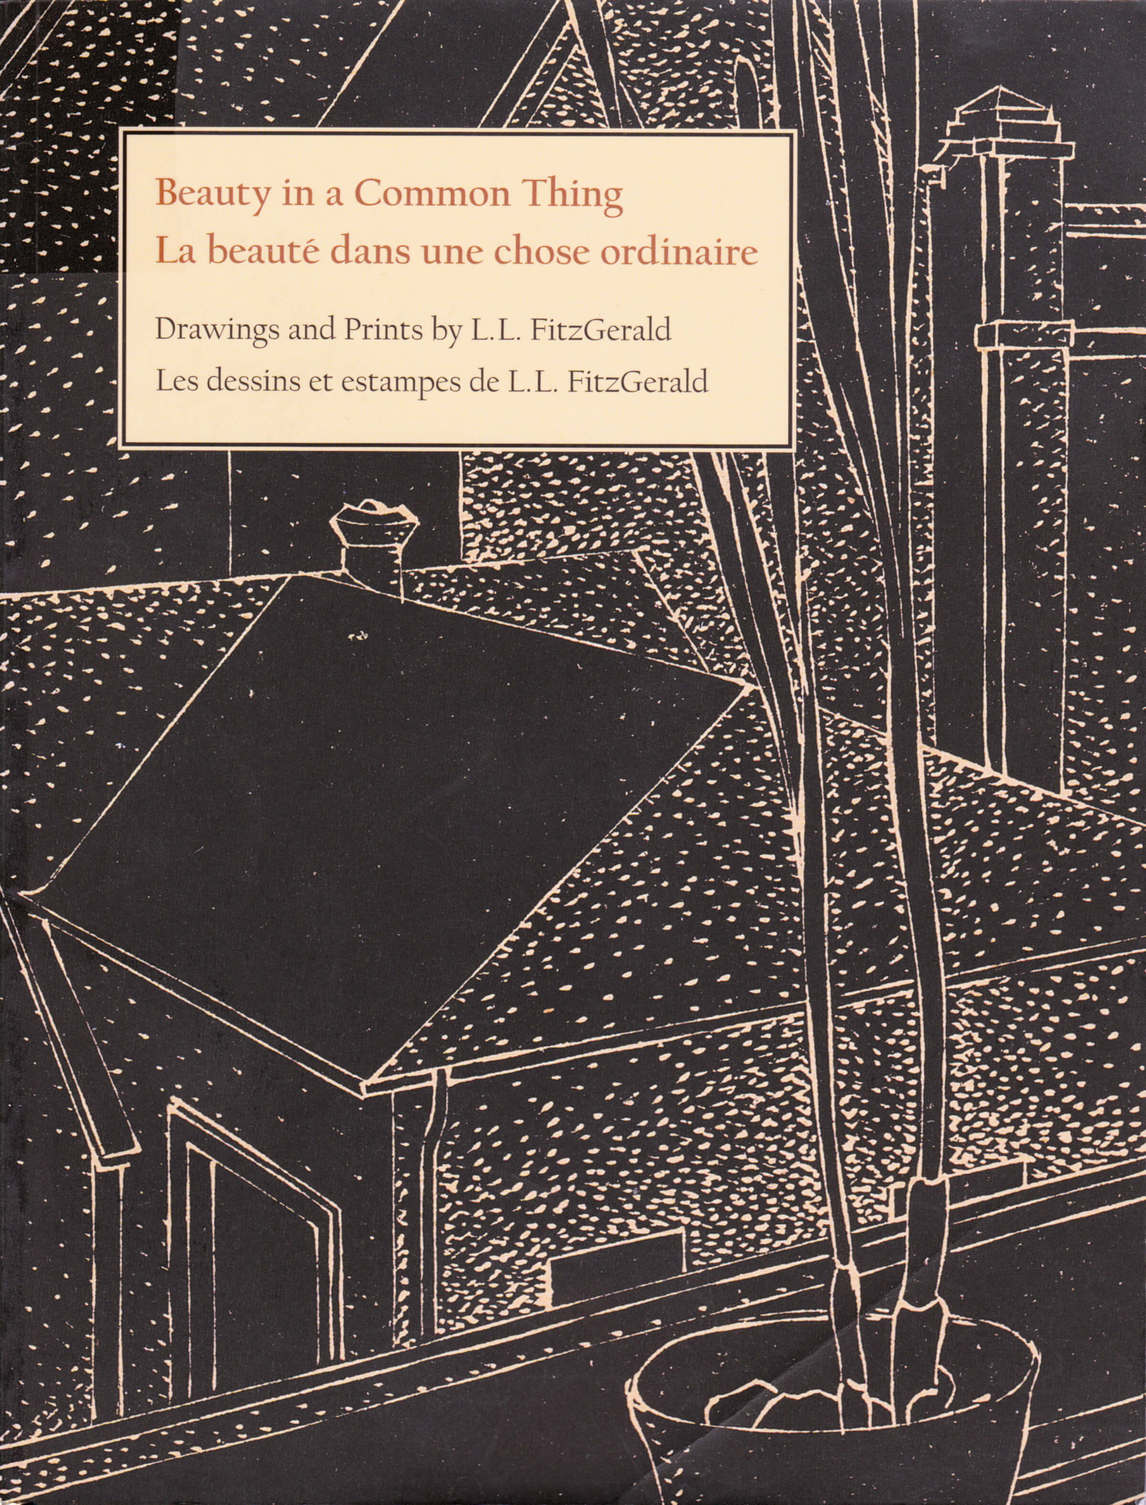 Art Canada Institute, cover of exhibition catalogue Beauty in a Common Thing: Drawings and Prints by L.L. FitzGerald, National Gallery of Canada, Ottawa (2004), featuring a detail of Lionel LeMoine FitzGerald, View from Window with Potted Plant, c. 1939